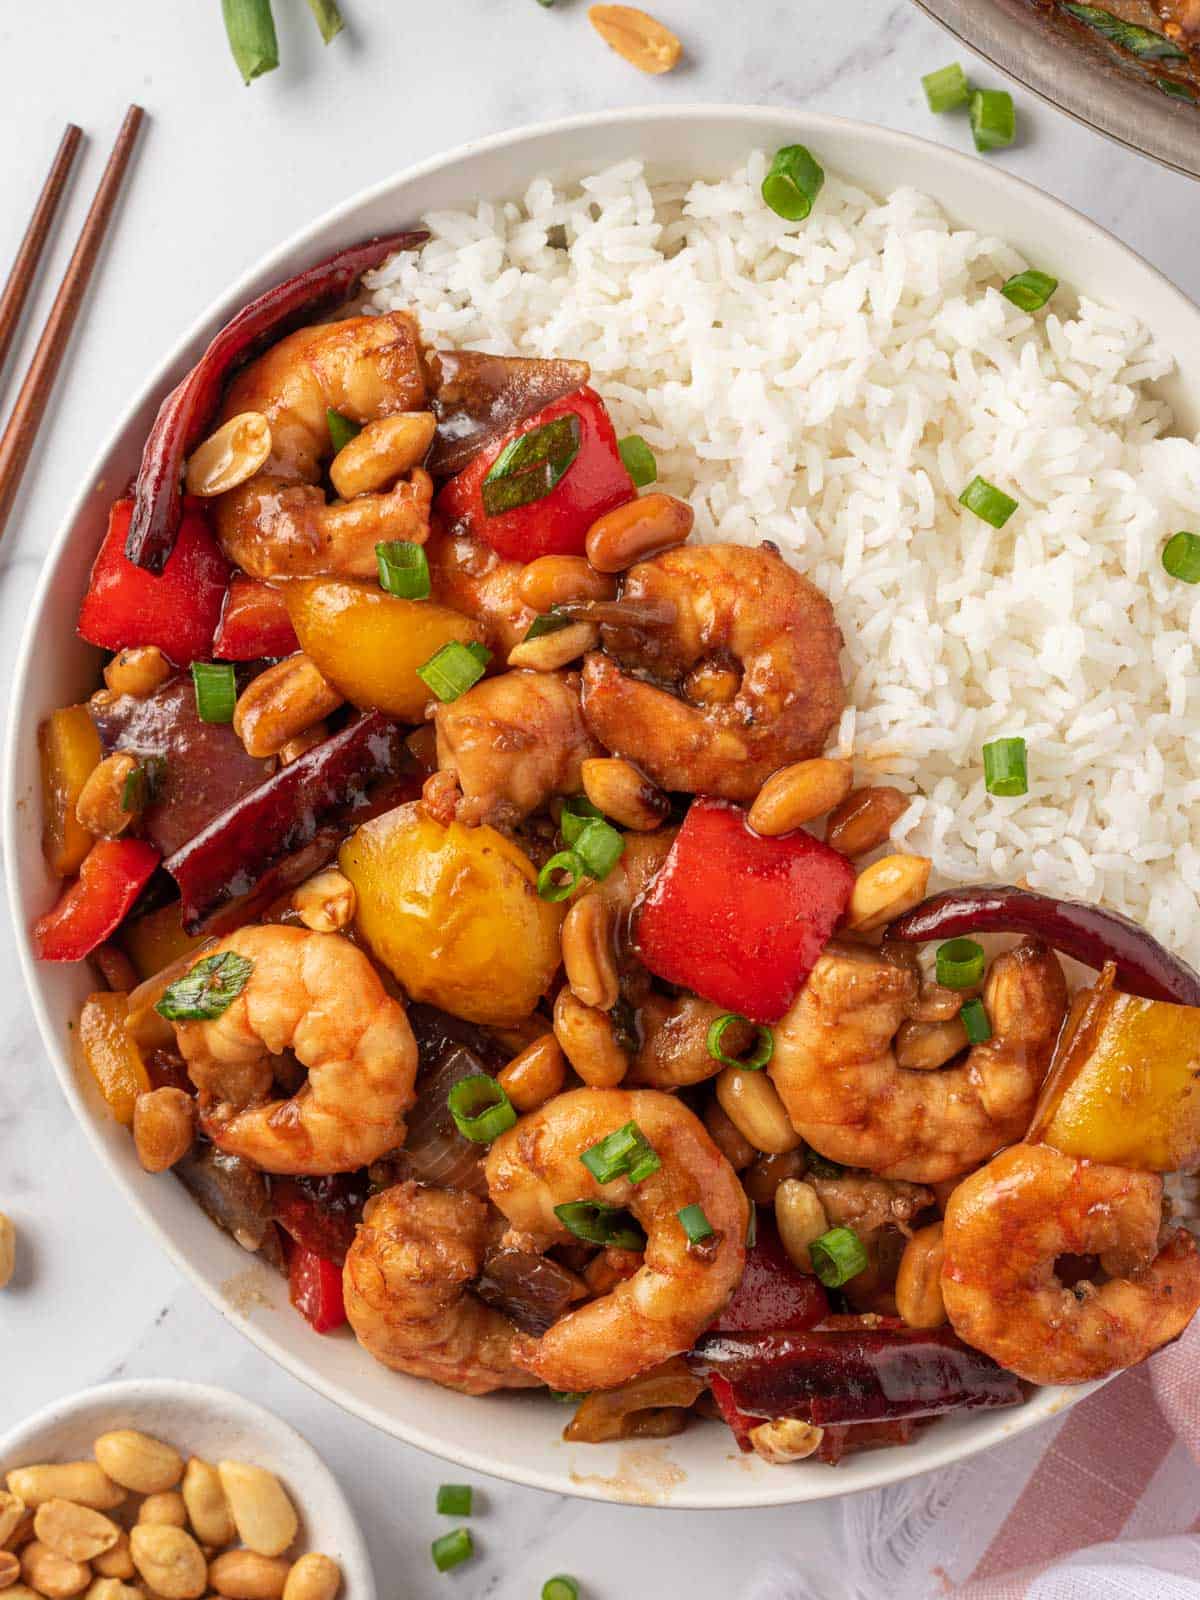 Spicy shrimp stir fry in a bowl with rice.